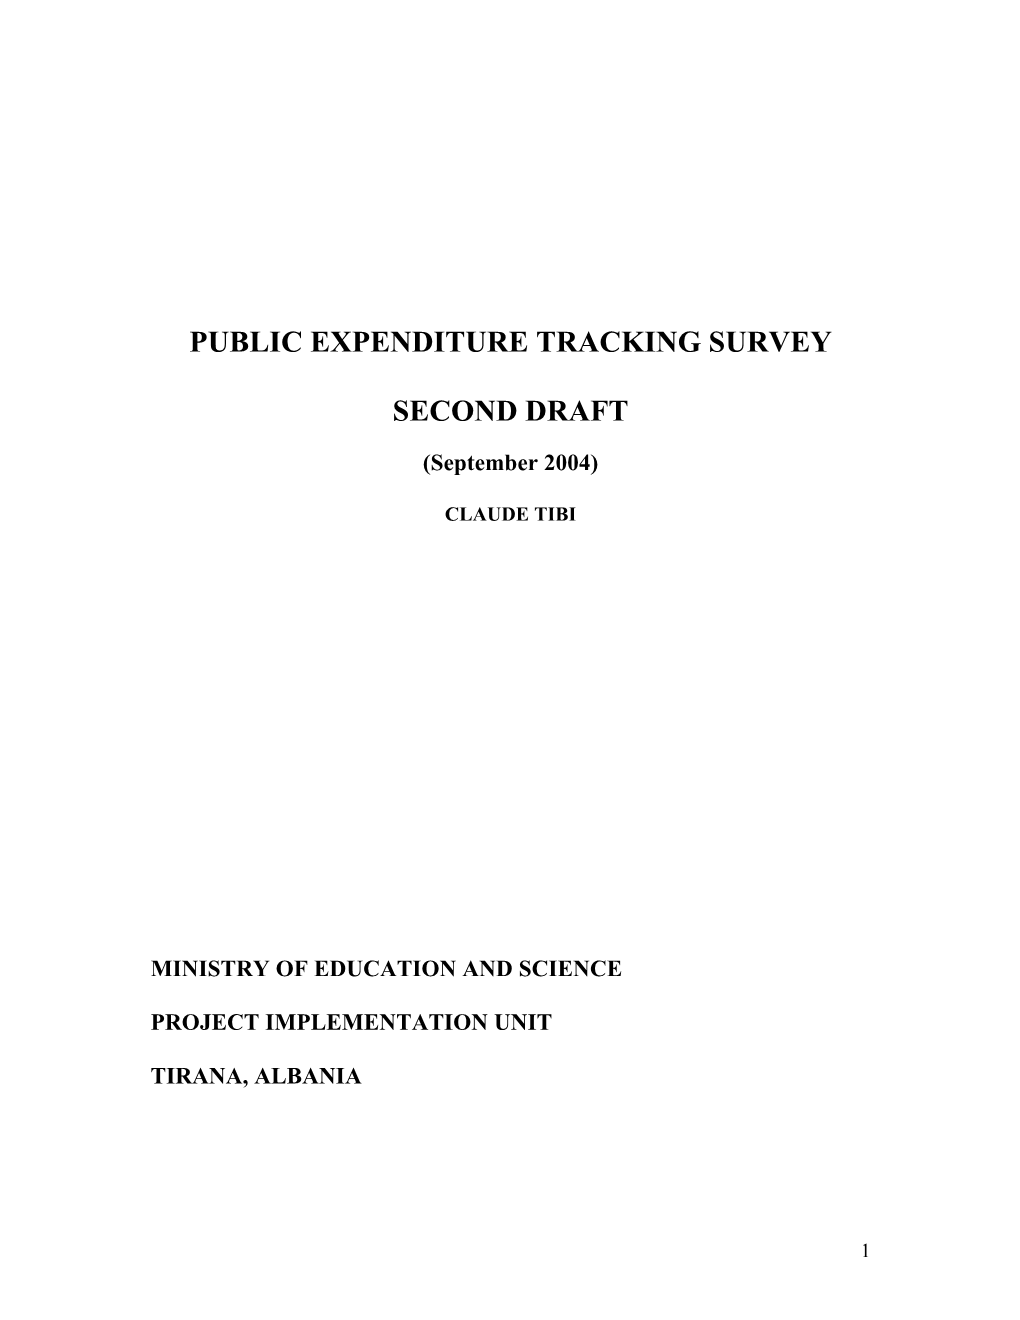 Public Expenditure Tracking Survey Second Draft